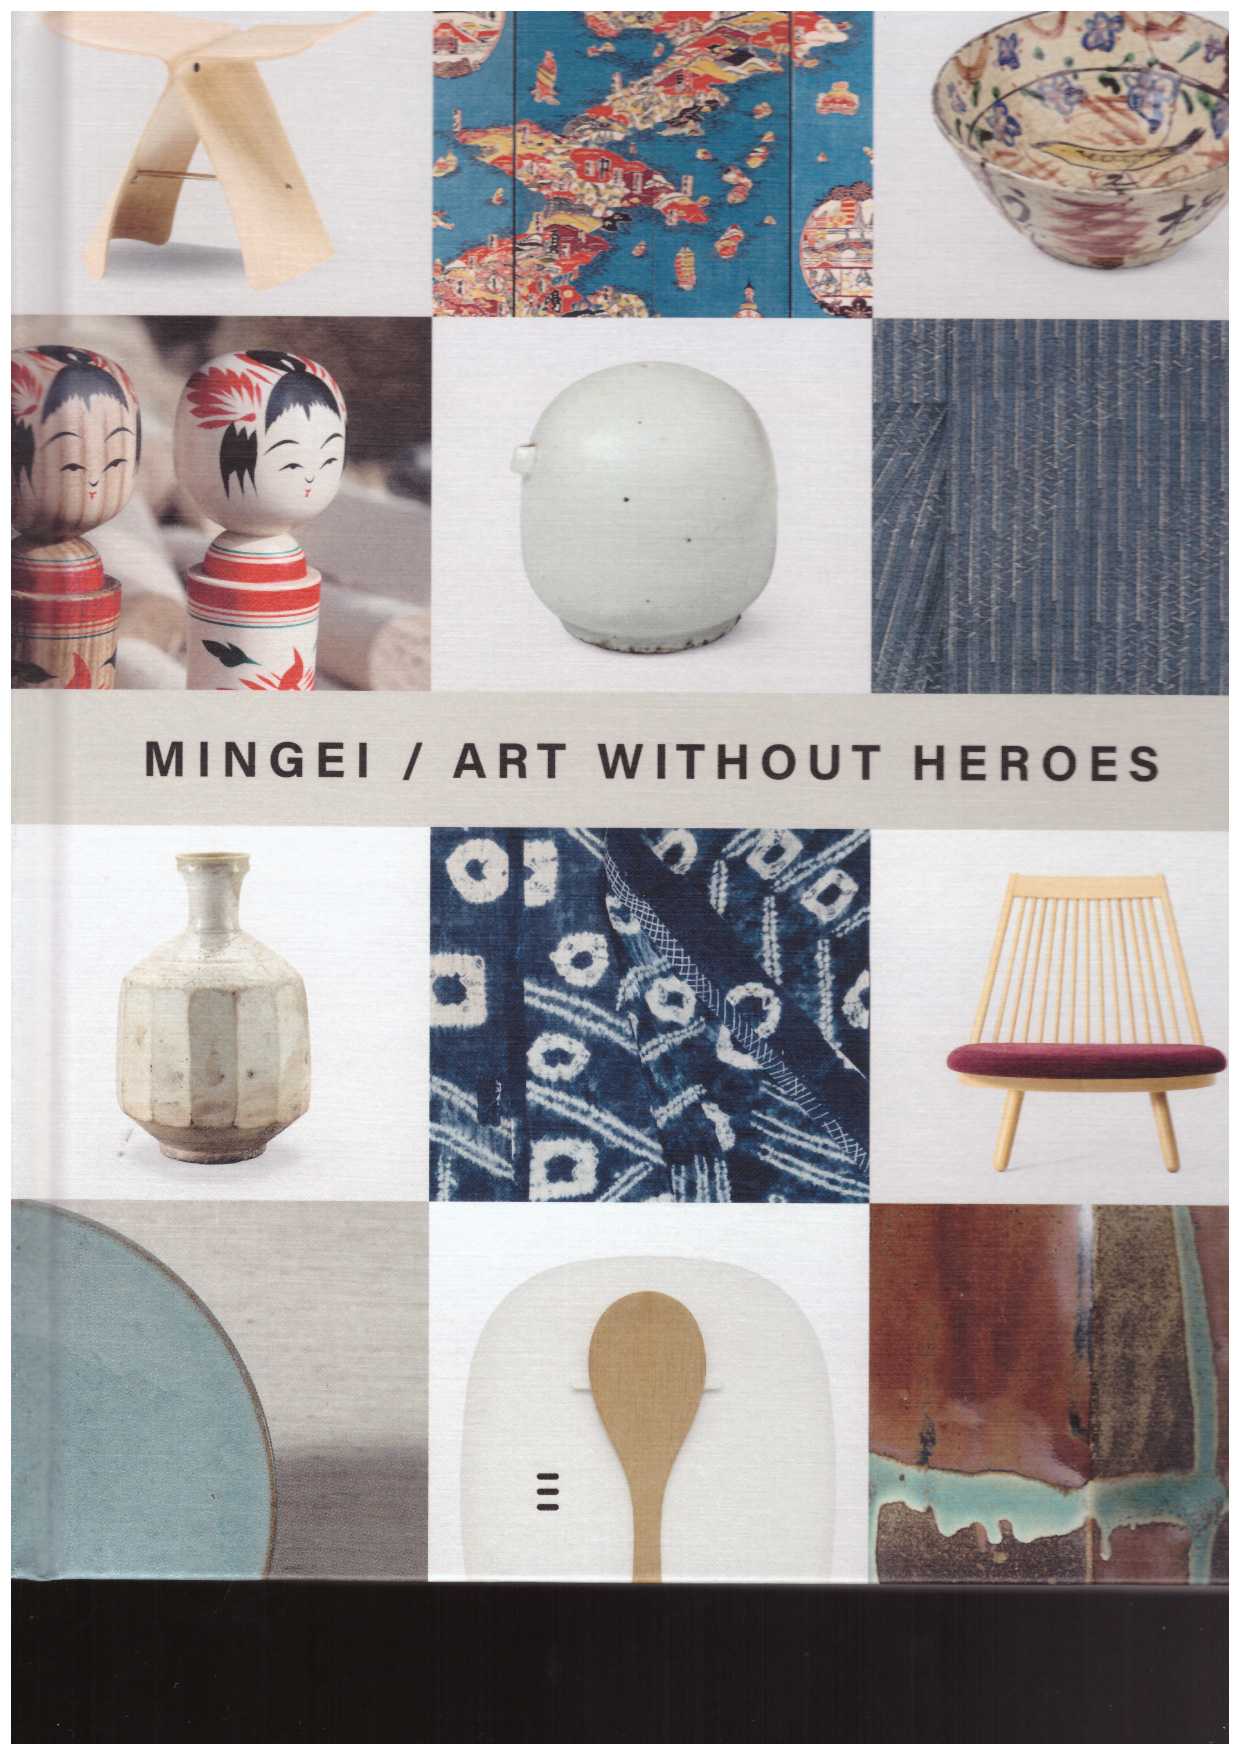 INGLESBY, Roisin (ed) - Mingei. Art Without Heroes